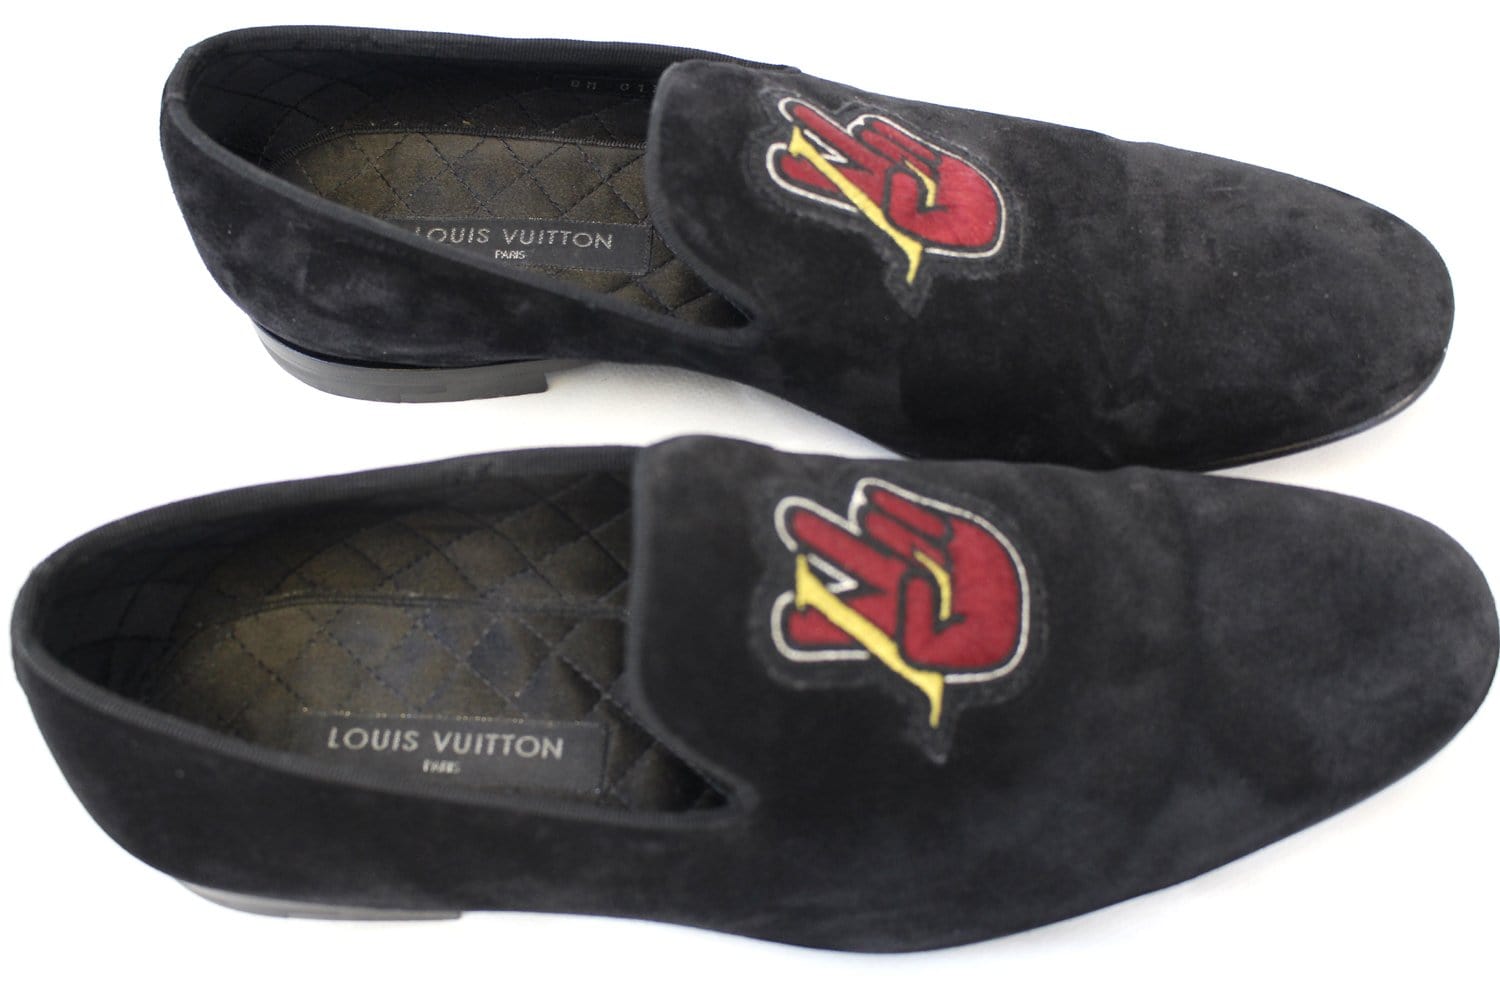 LOUIS VUITTON MENS BLACK VELVET EVENING LOAFERS SIZE 8 1/2 MADE IN  ITALY🇮🇹